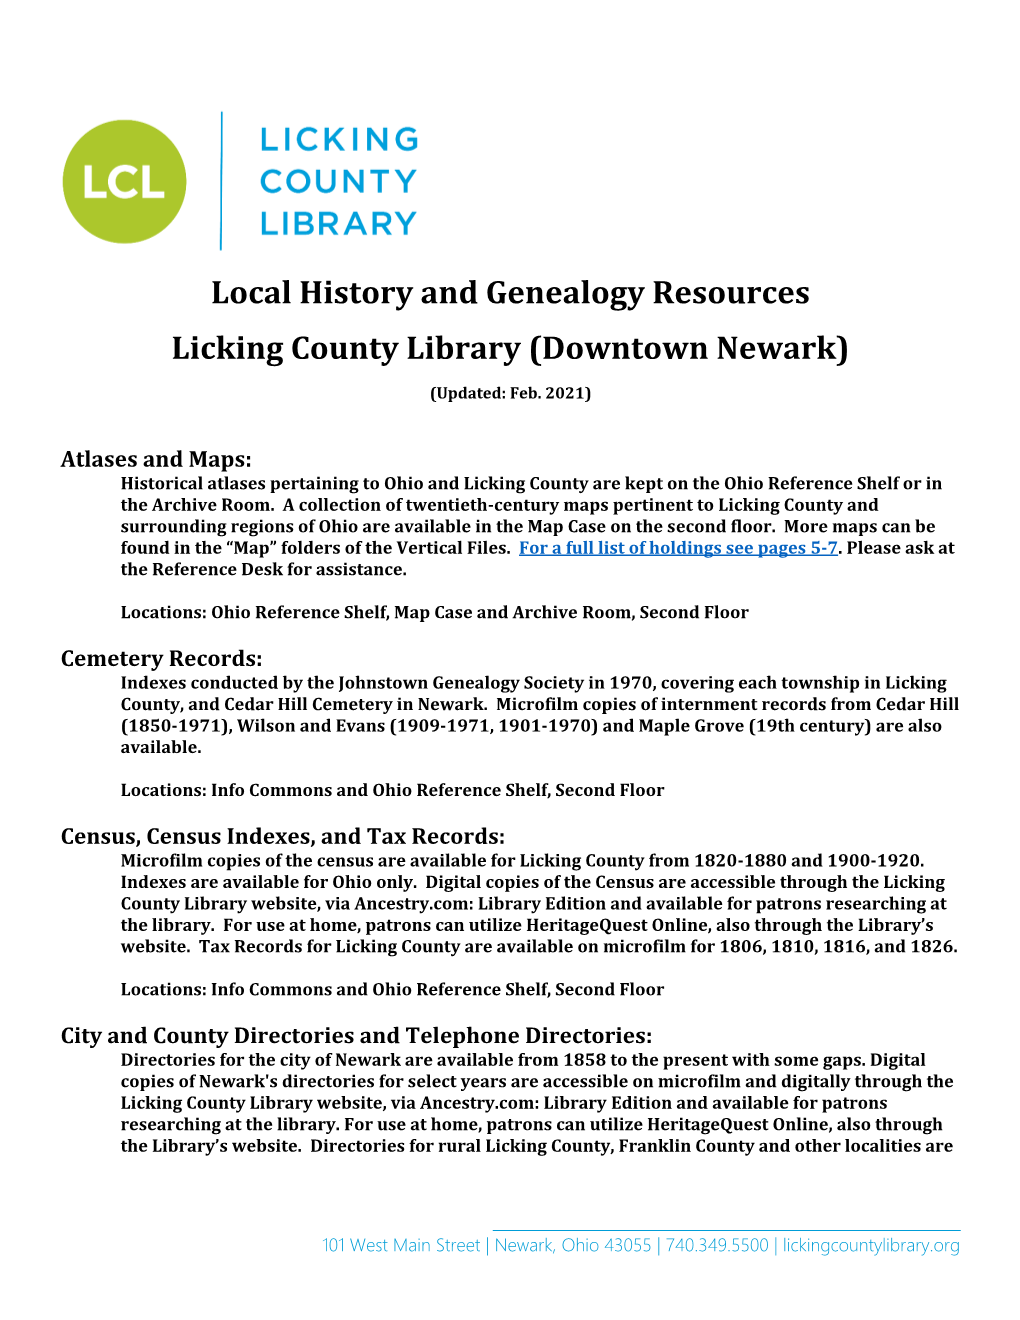 Local History and Genealogy Resources Licking County Library (Downtown Newark)